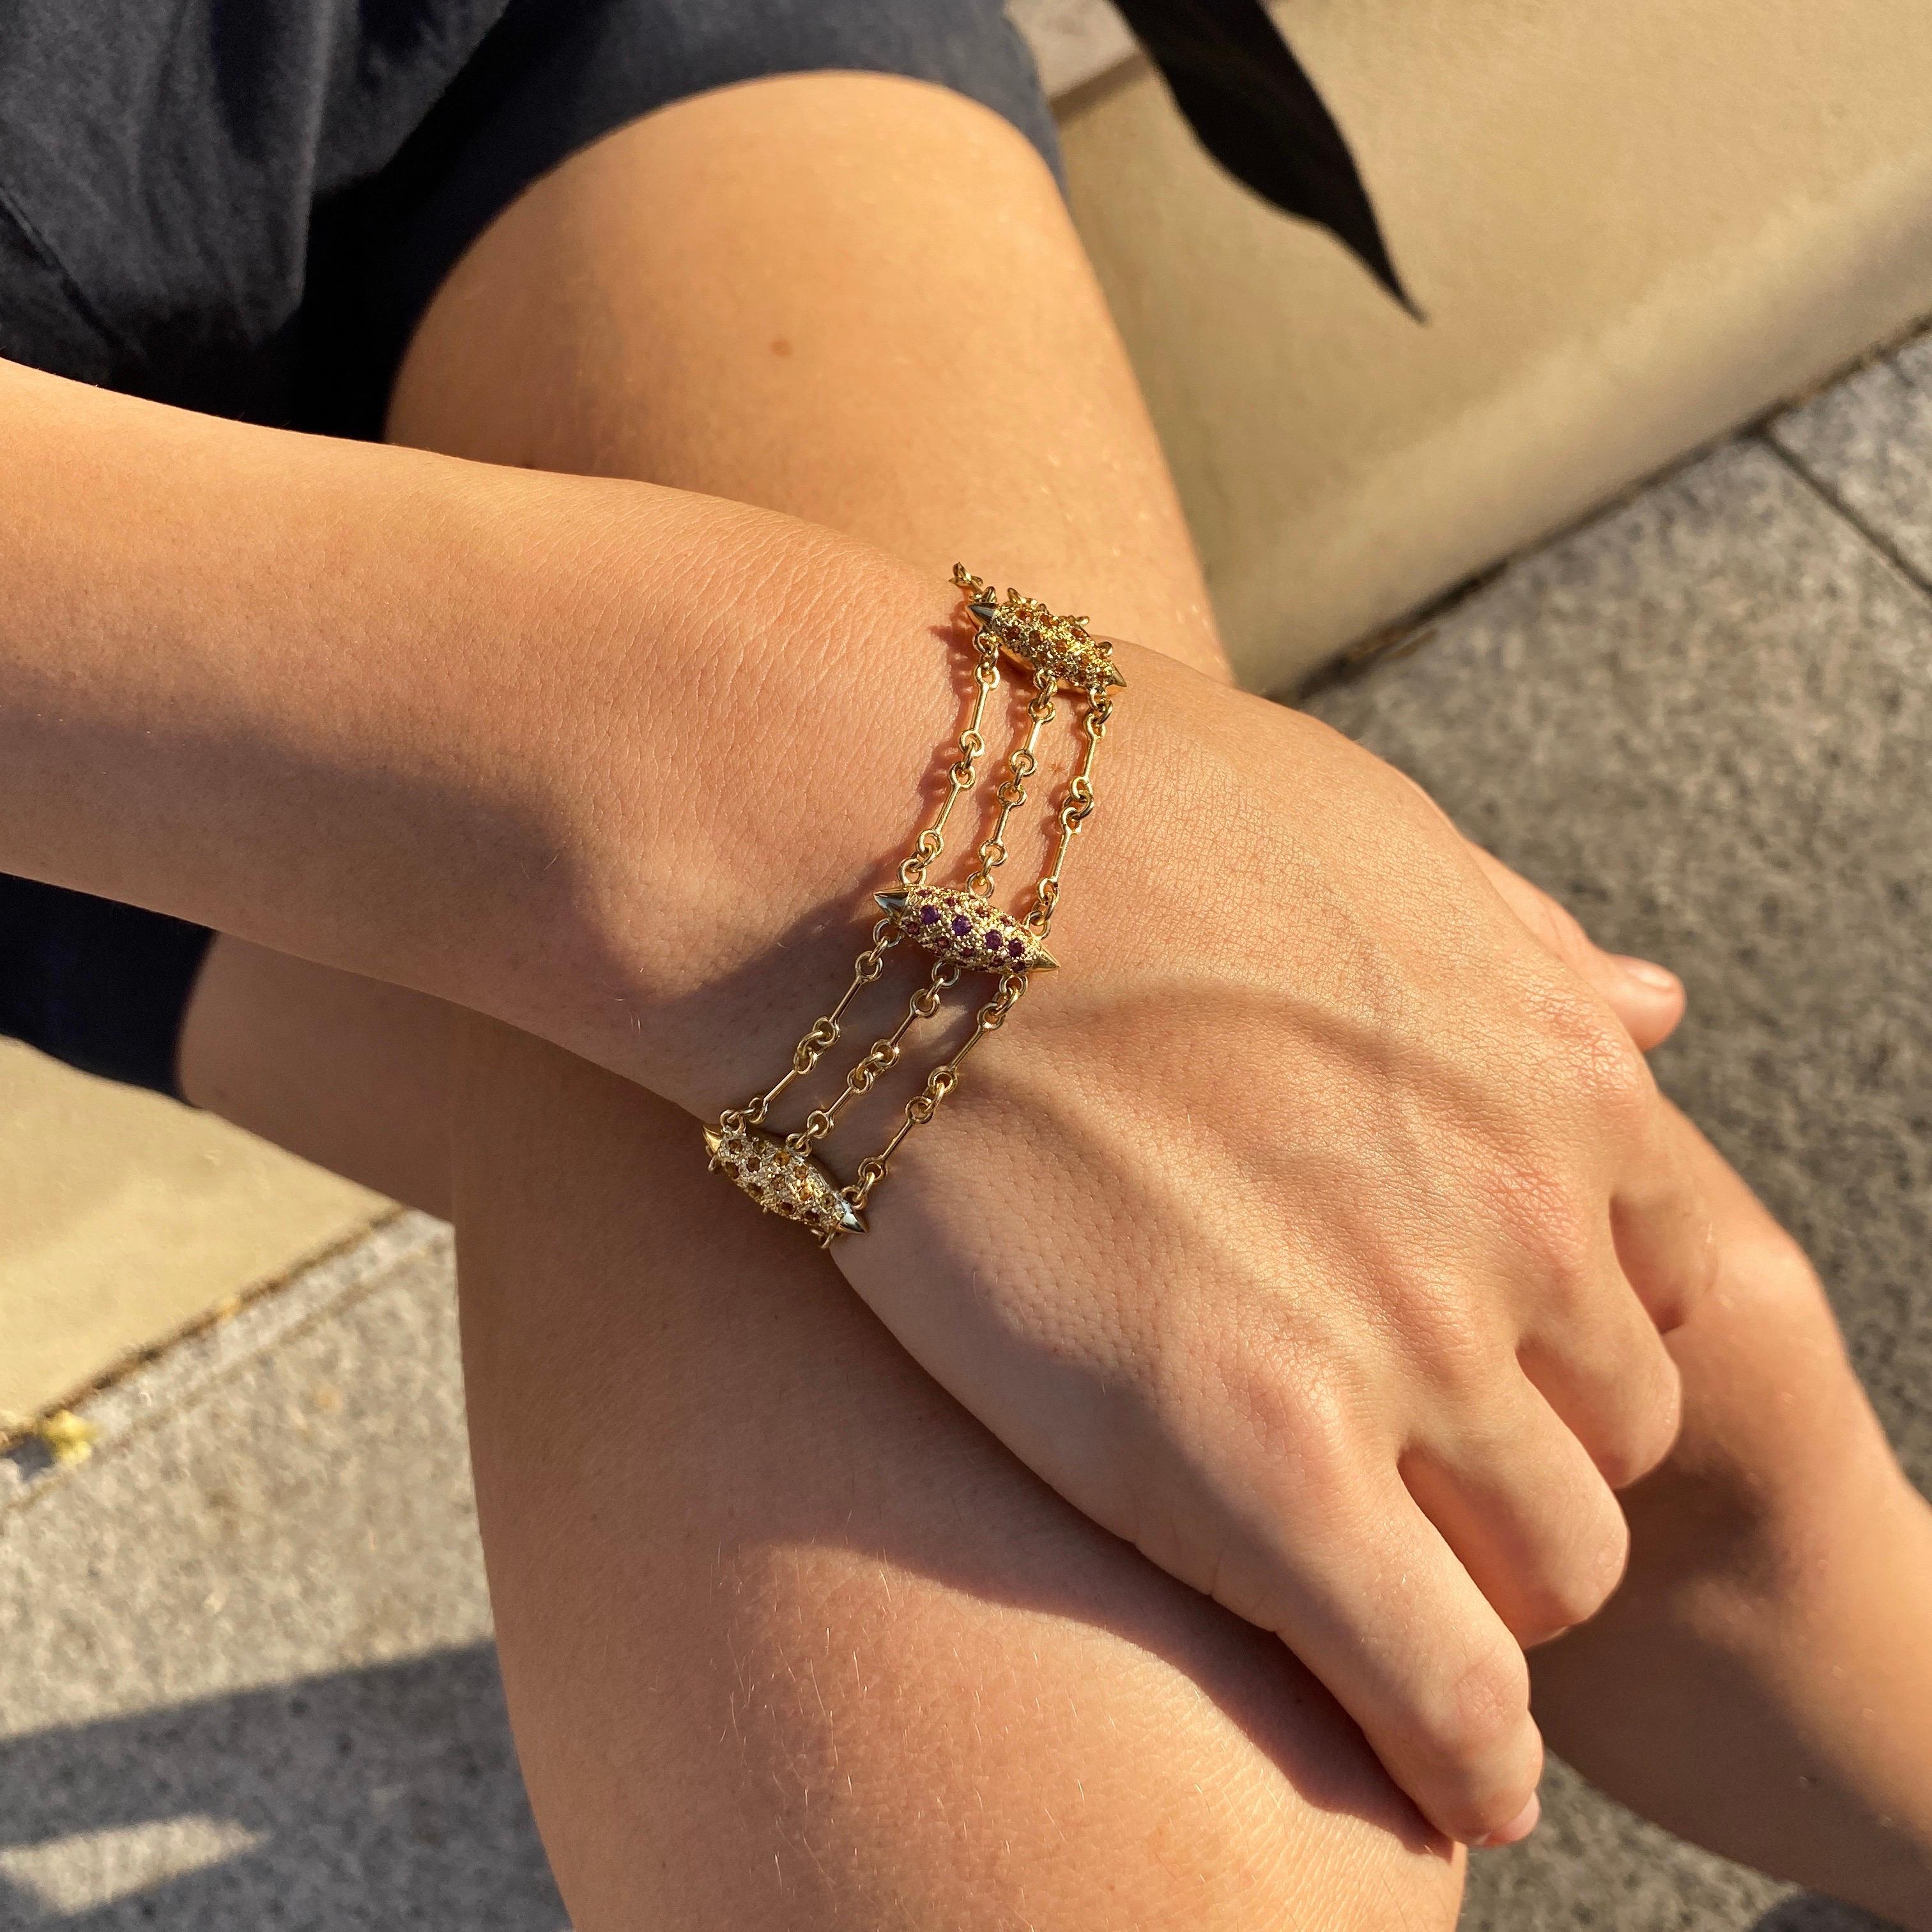 The ‘Six Grain’, chain bracelet is crafted in 18K gold hallmarked in Cyprus. This impressive, ultra chic chain bracelet comes in a highly polished finish and comprises six individual grains set with Madeira Citrines, 0,9 Cts and Rhodolite Garnets,